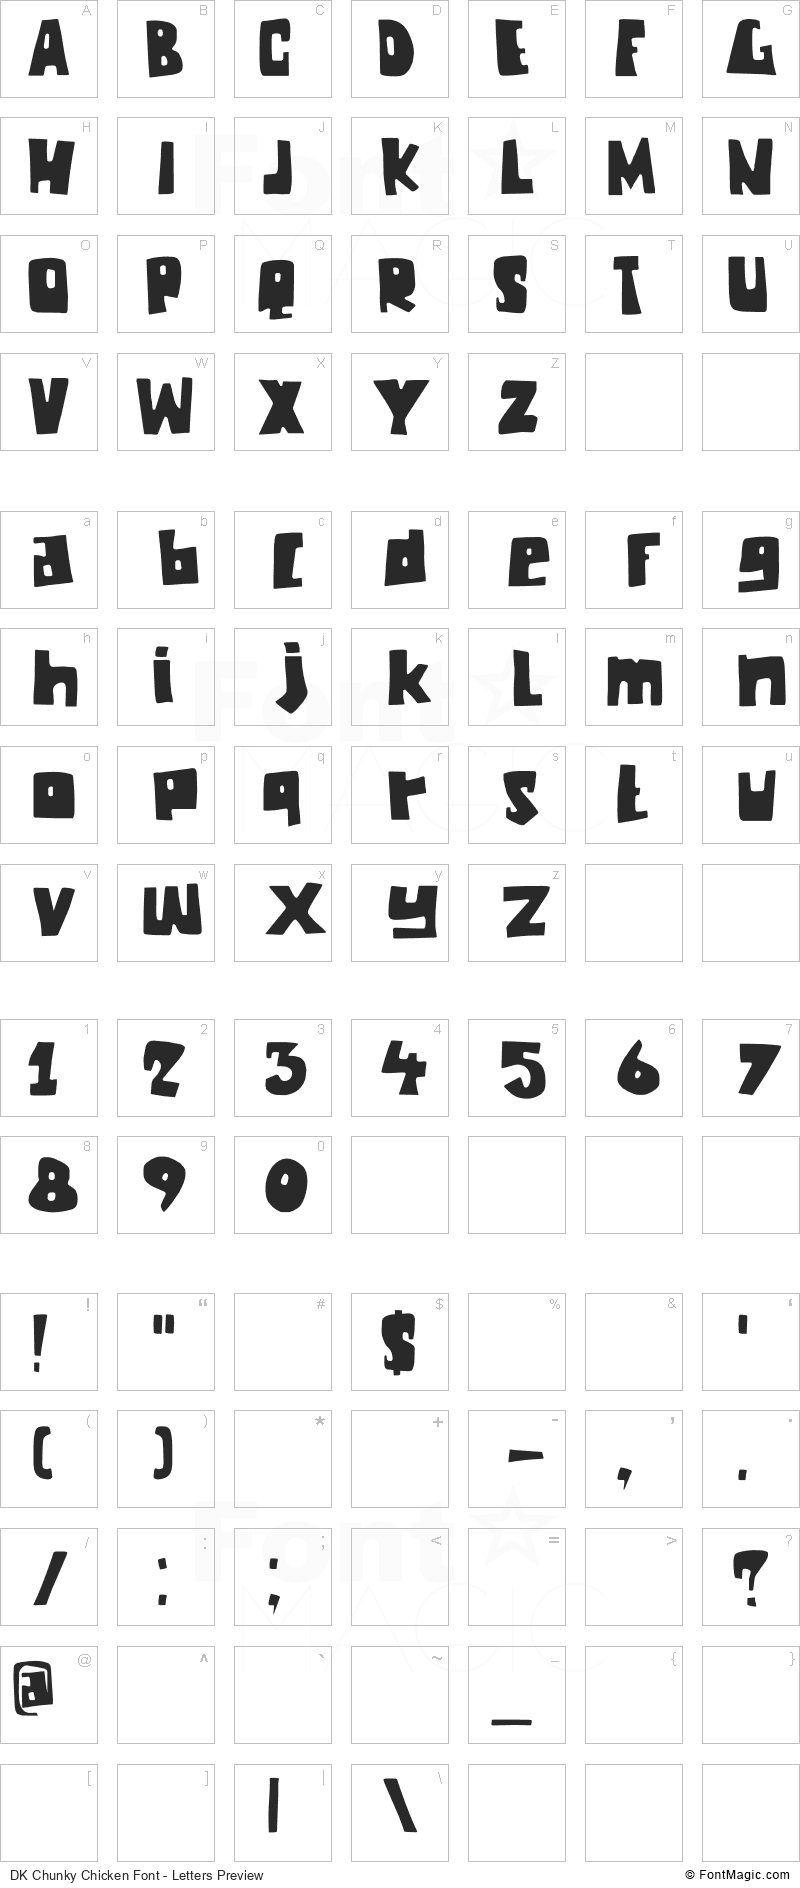 DK Chunky Chicken Font - All Latters Preview Chart